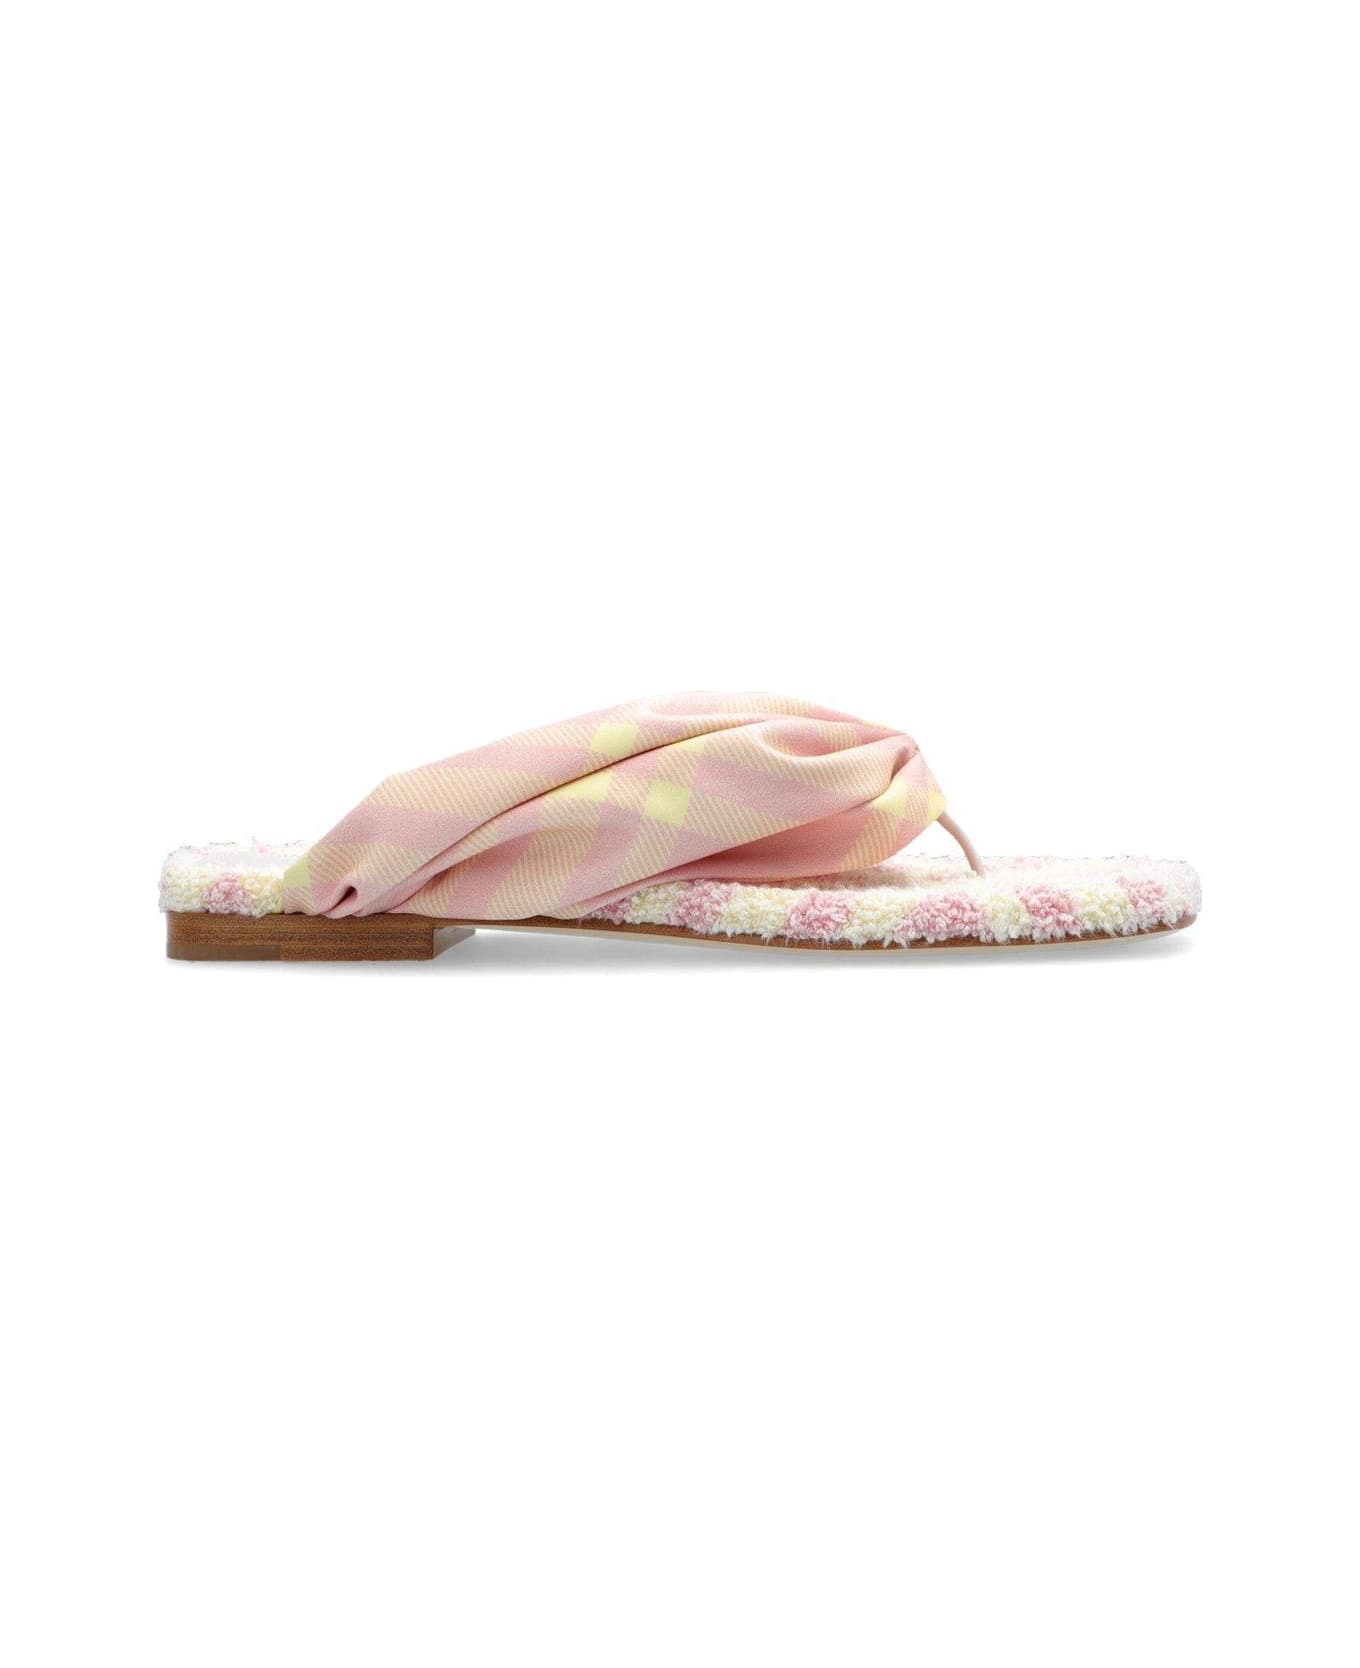 Burberry Check Printed Open-toe Flat Sandals - White サンダル